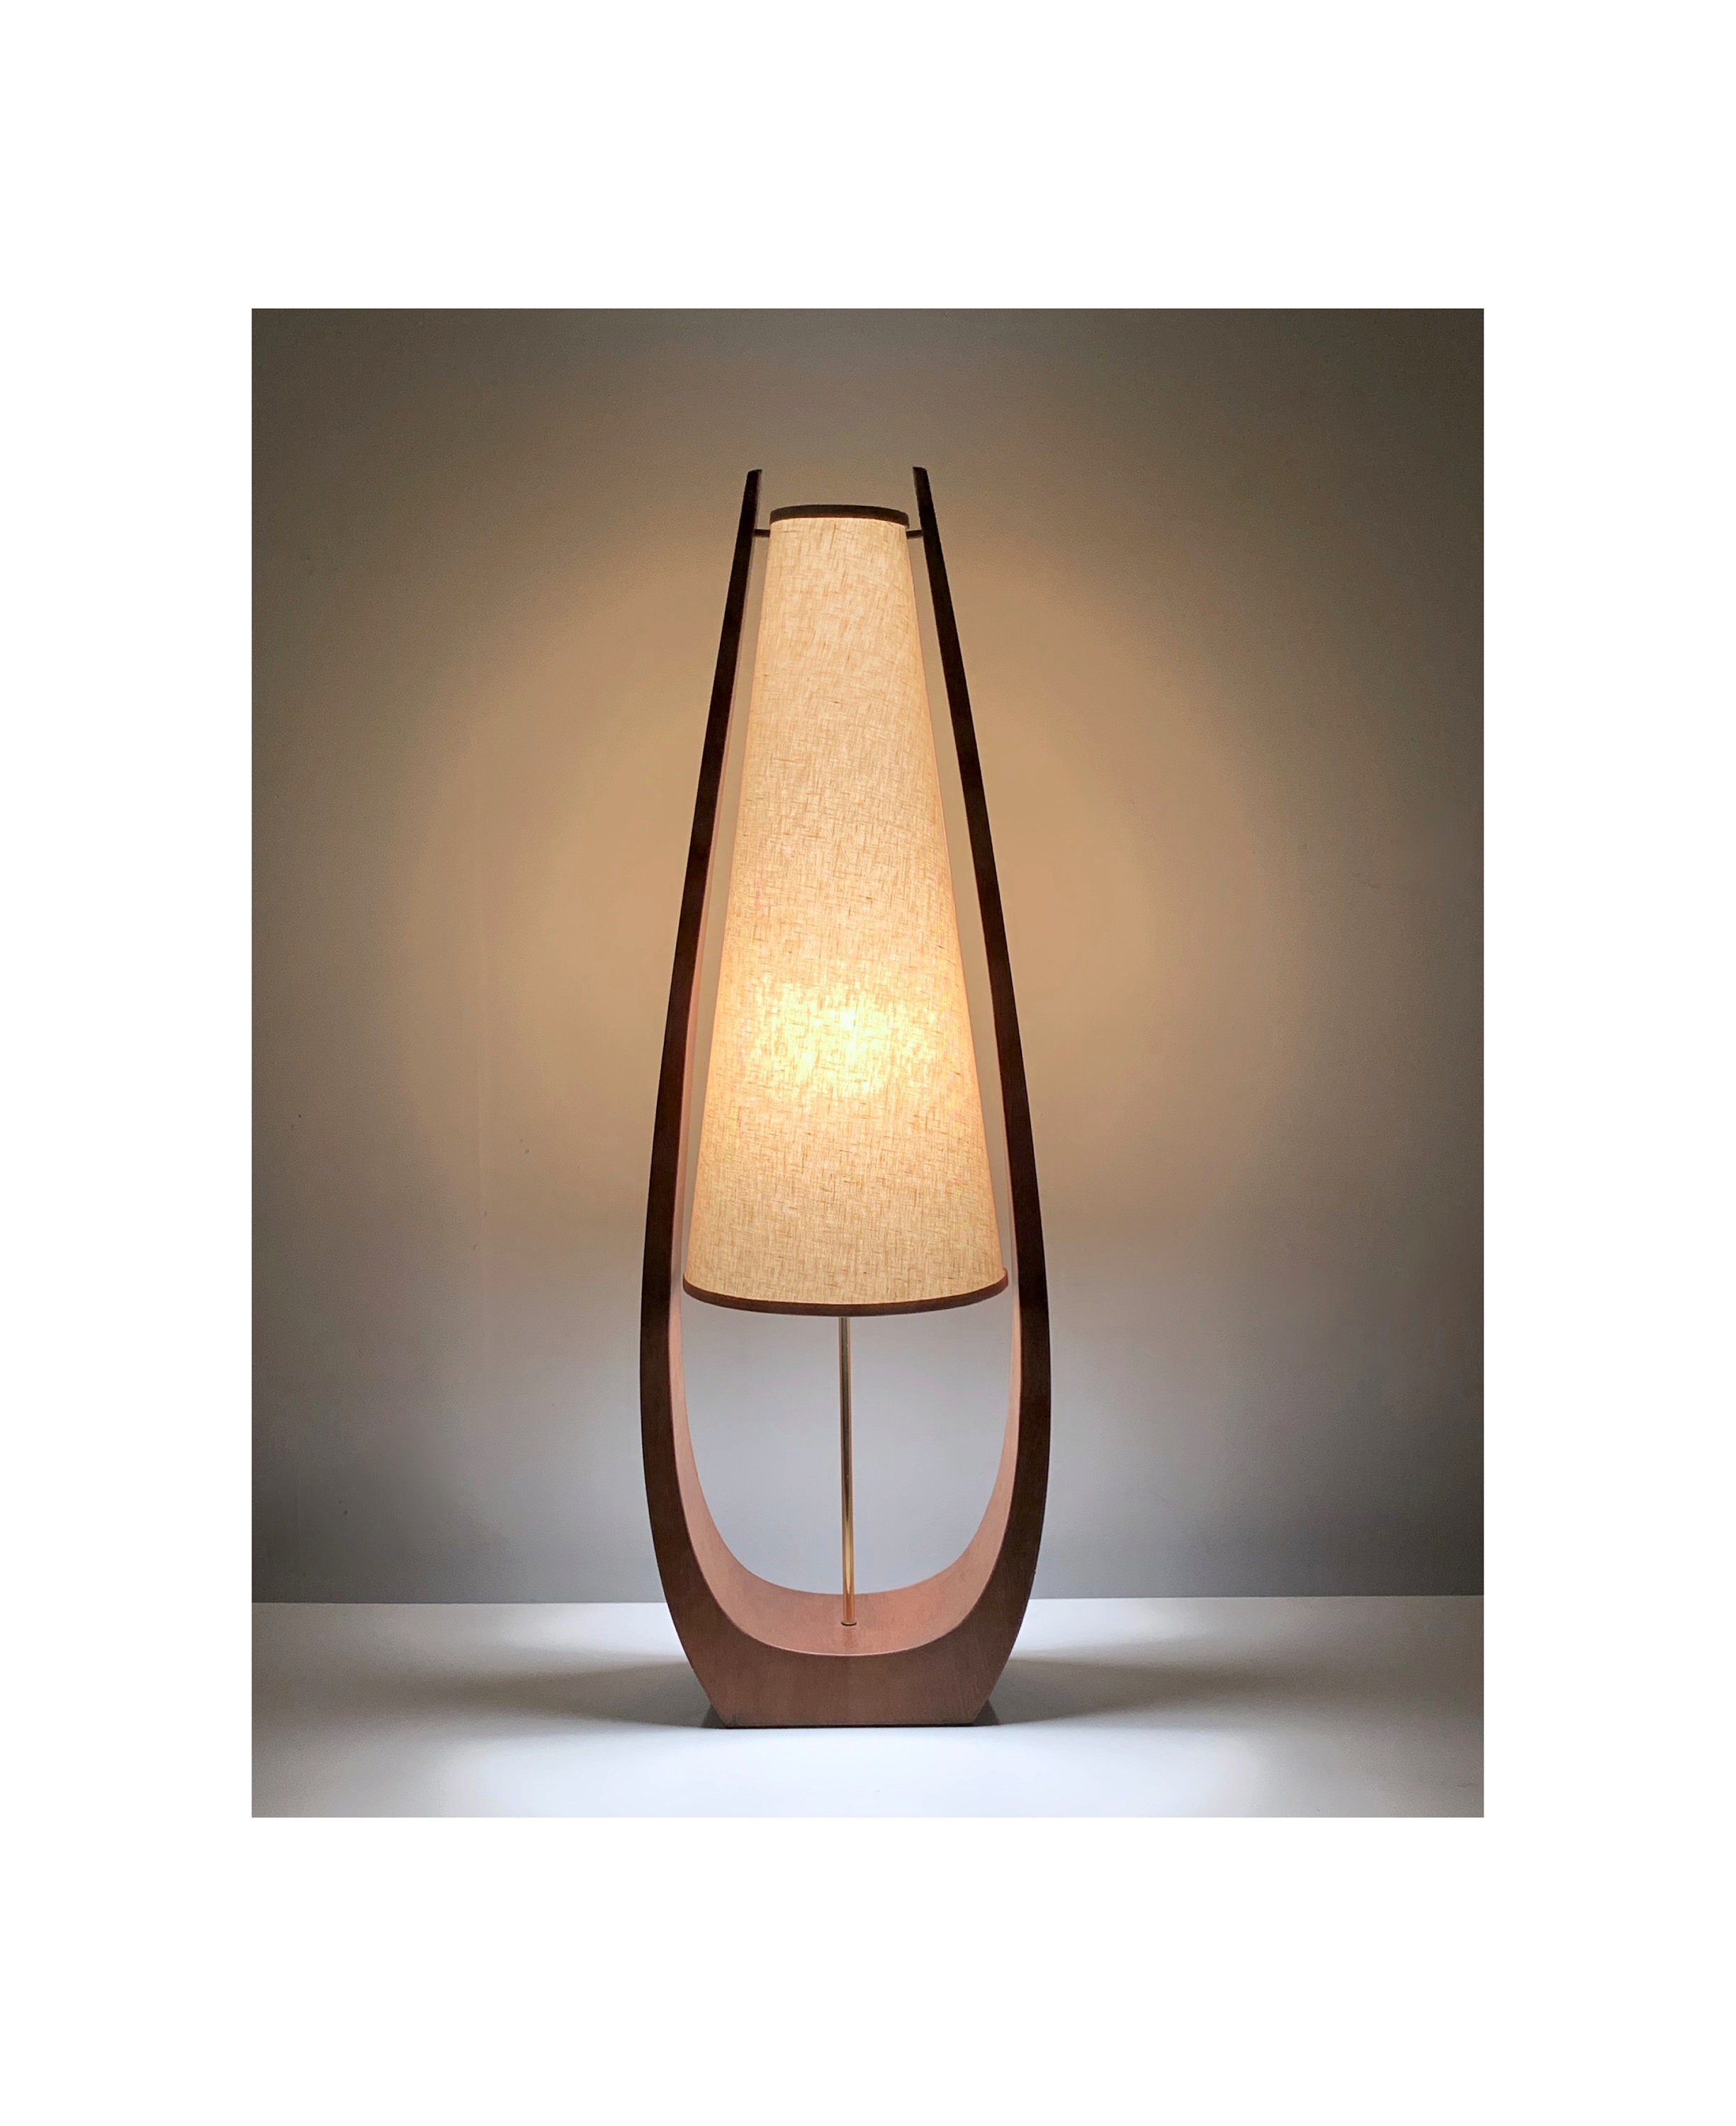 ON HOLD 41 Tall Mid Century Modern Table Lamp Attributed to Modeline 1960's